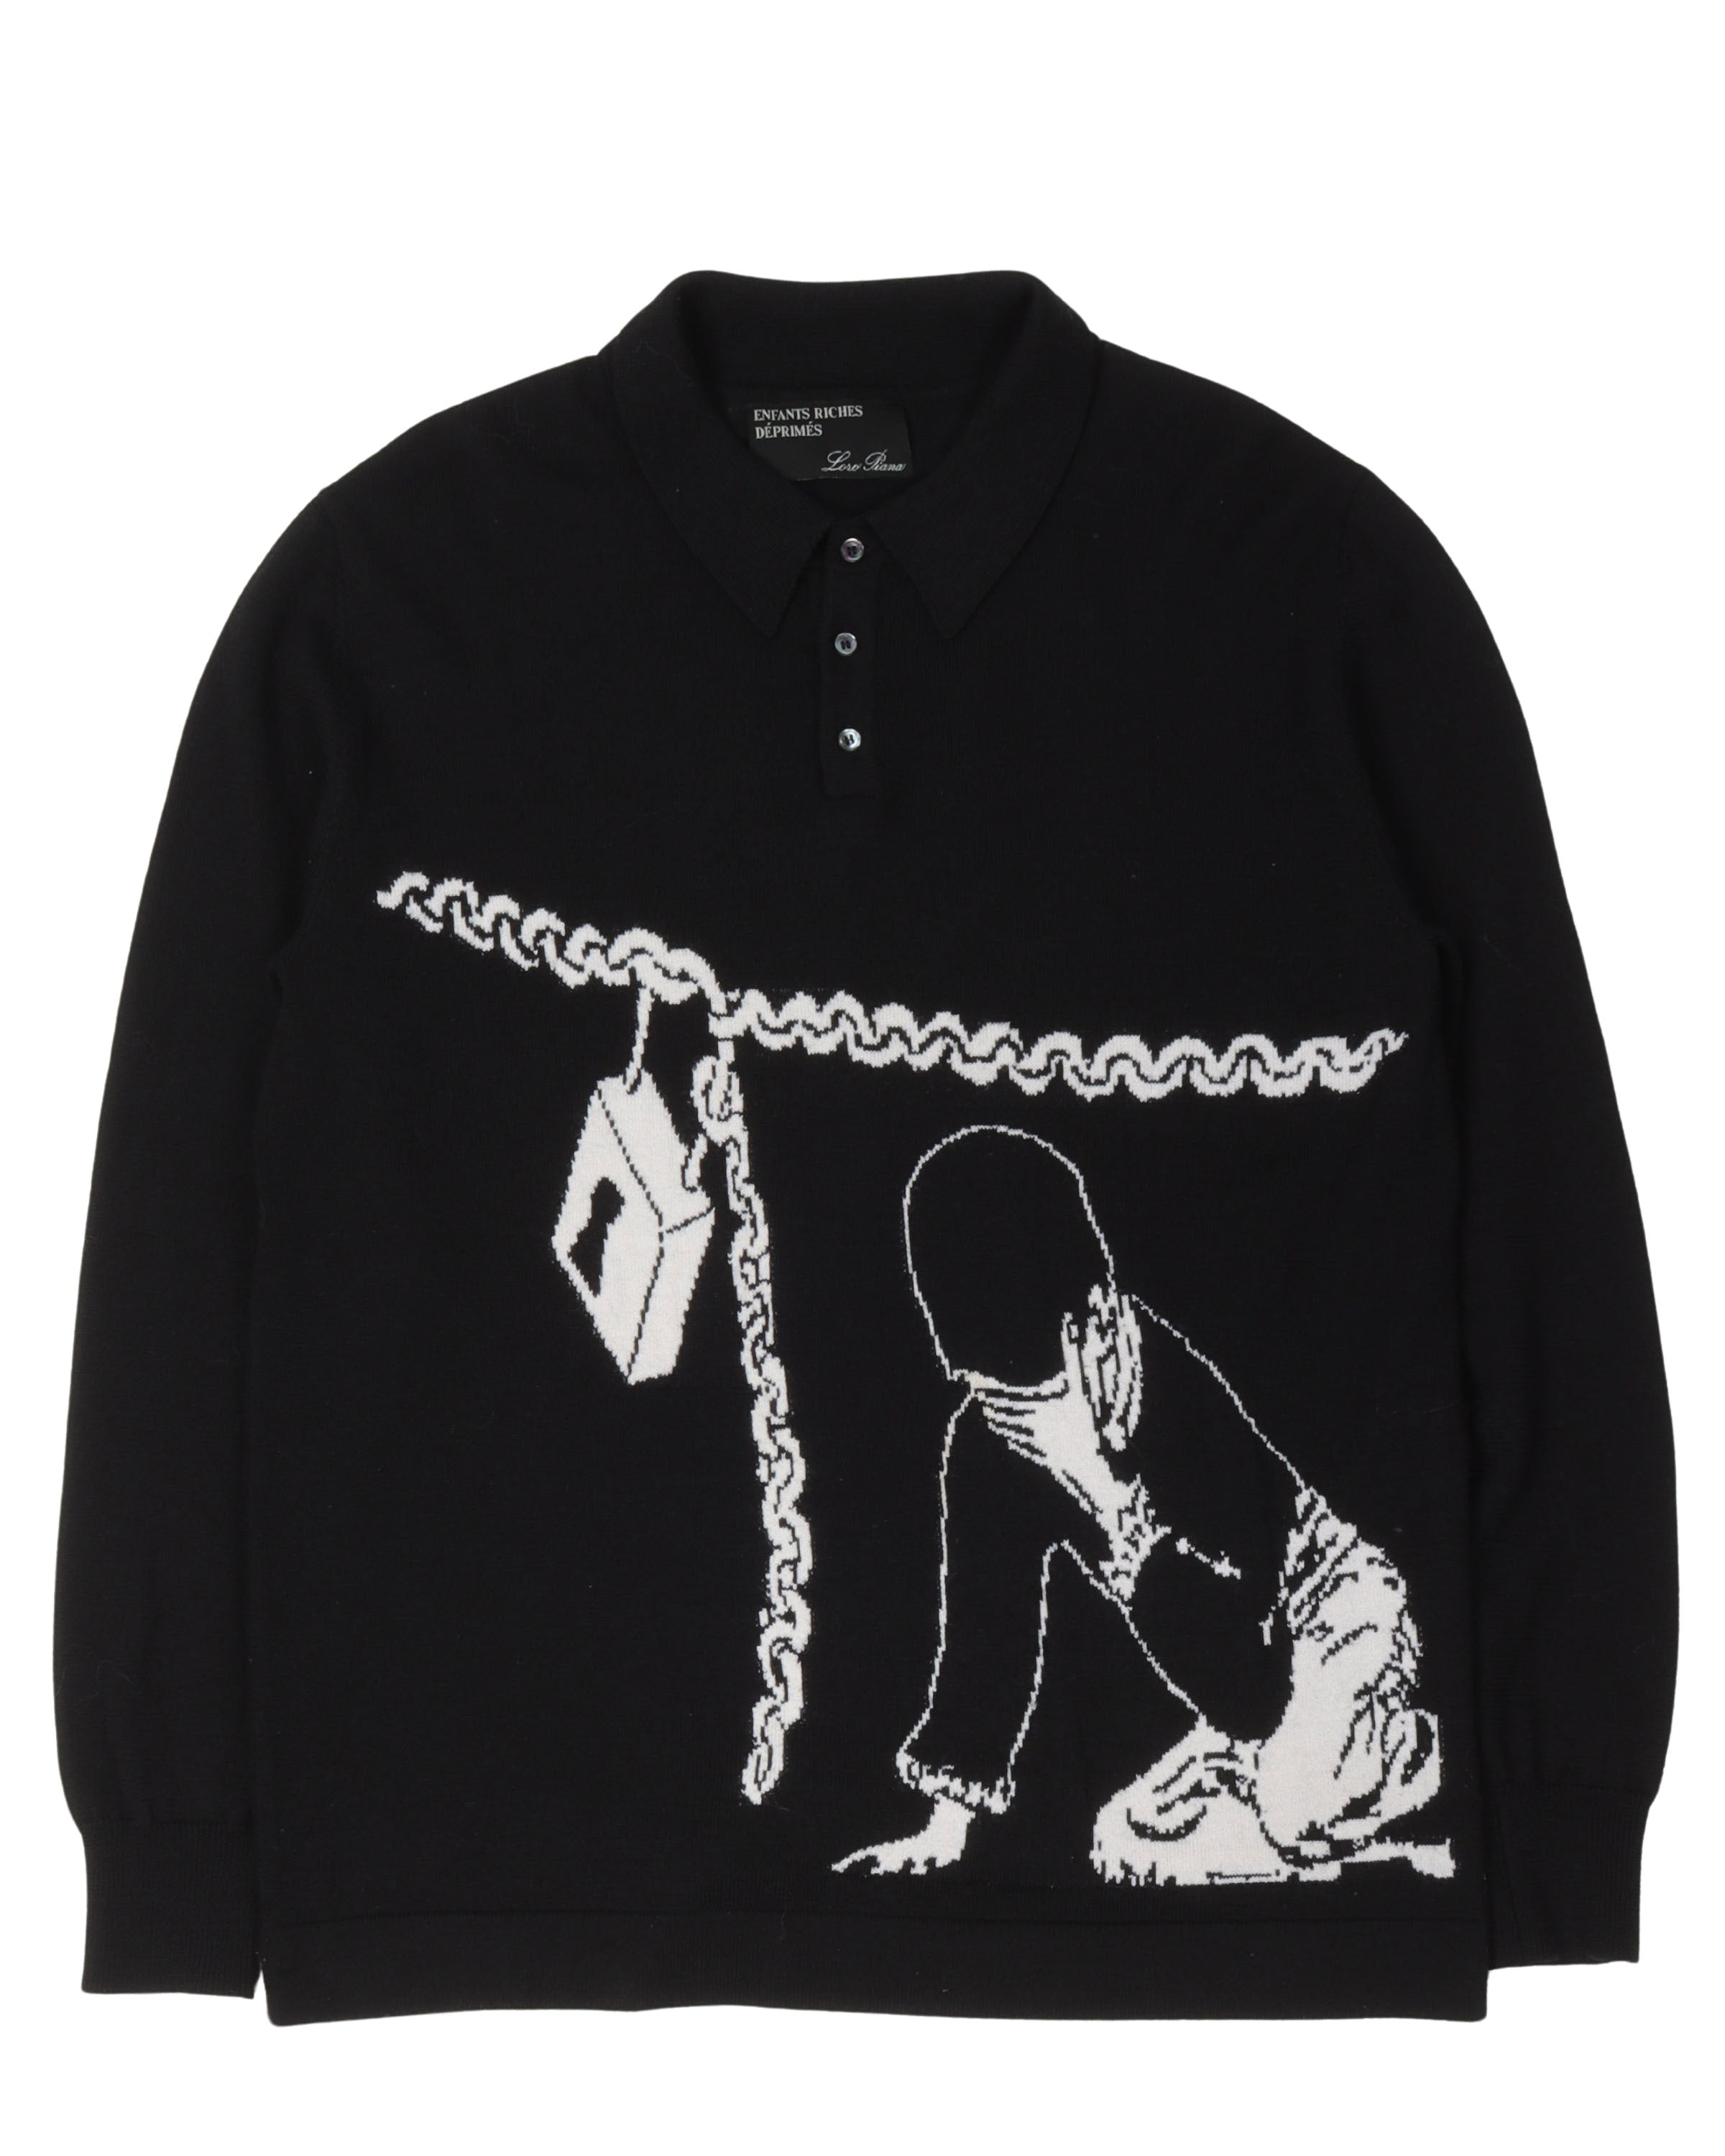 Enfants Riches Deprimes Loro Piana Boy With Chain Sweater